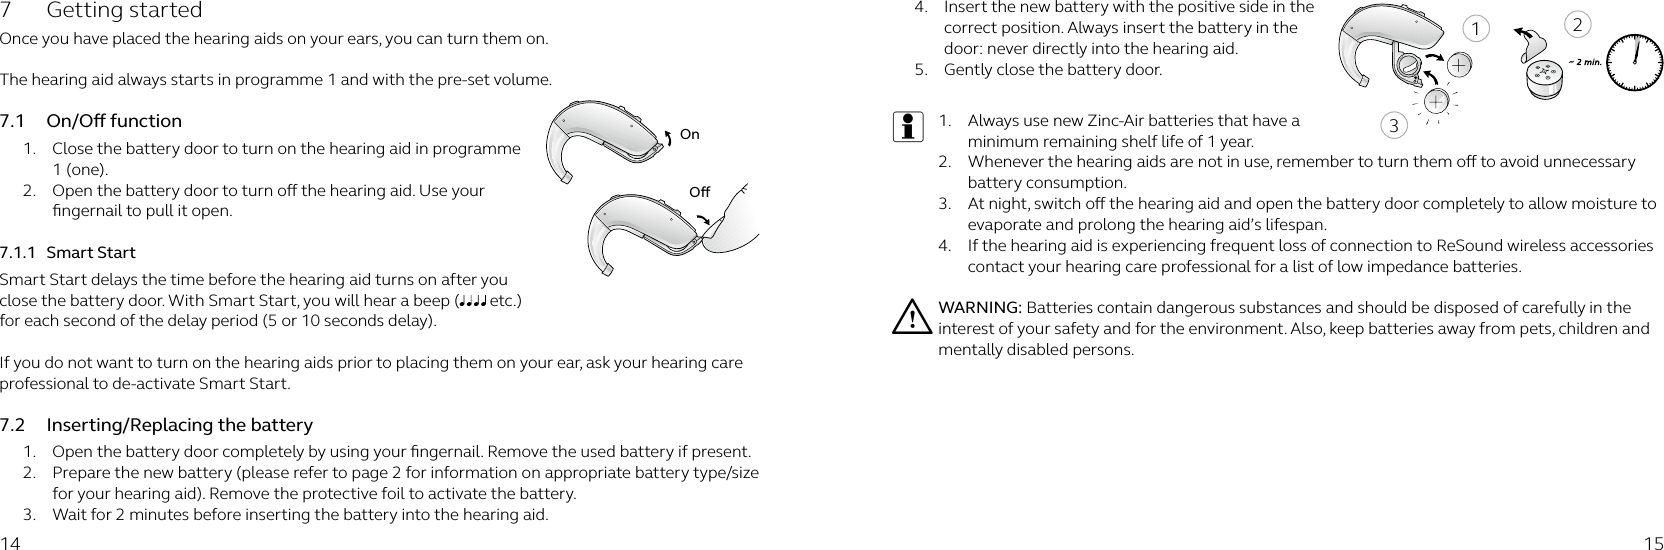 21314 15OnO7  Getting started Once you have placed the hearing aids on your ears, you can turn them on. The hearing aid always starts in programme 1 and with the pre-set volume.7.1  On/O function1.  Close the battery door to turn on the hearing aid in programme 1 (one).2.  Open the battery door to turn o the hearing aid. Use your ﬁngernail to pull it open. 7.1.1  Smart StartSmart Start delays the time before the hearing aid turns on after you close the battery door. With Smart Start, you will hear a beep (  etc.) for each second of the delay period (5 or 10 seconds delay). If you do not want to turn on the hearing aids prior to placing them on your ear, ask your hearing care professional to de-activate Smart Start.7.2  Inserting/Replacing the battery1.  Open the battery door completely by using your ﬁngernail. Remove the used battery if present.2.  Prepare the new battery (please refer to page 2 for information on appropriate battery type/size for your hearing aid). Remove the protective foil to activate the battery. 3.  Wait for 2 minutes before inserting the battery into the hearing aid.4.  Insert the new battery with the positive side in the correct position. Always insert the battery in the door: never directly into the hearing aid. 5.  Gently close the battery door.i1.  Always use new Zinc-Air batteries that have a minimum remaining shelf life of 1 year.2.  Whenever the hearing aids are not in use, remember to turn them o to avoid unnecessary battery consumption.3.  At night, switch o the hearing aid and open the battery door completely to allow moisture to evaporate and prolong the hearing aid’s lifespan.4.  If the hearing aid is experiencing frequent loss of connection to ReSound wireless accessories contact your hearing care professional for a list of low impedance batteries.i WARNING: Batteries contain dangerous substances and should be disposed of carefully in the interest of your safety and for the environment. Also, keep batteries away from pets, children and mentally disabled persons.